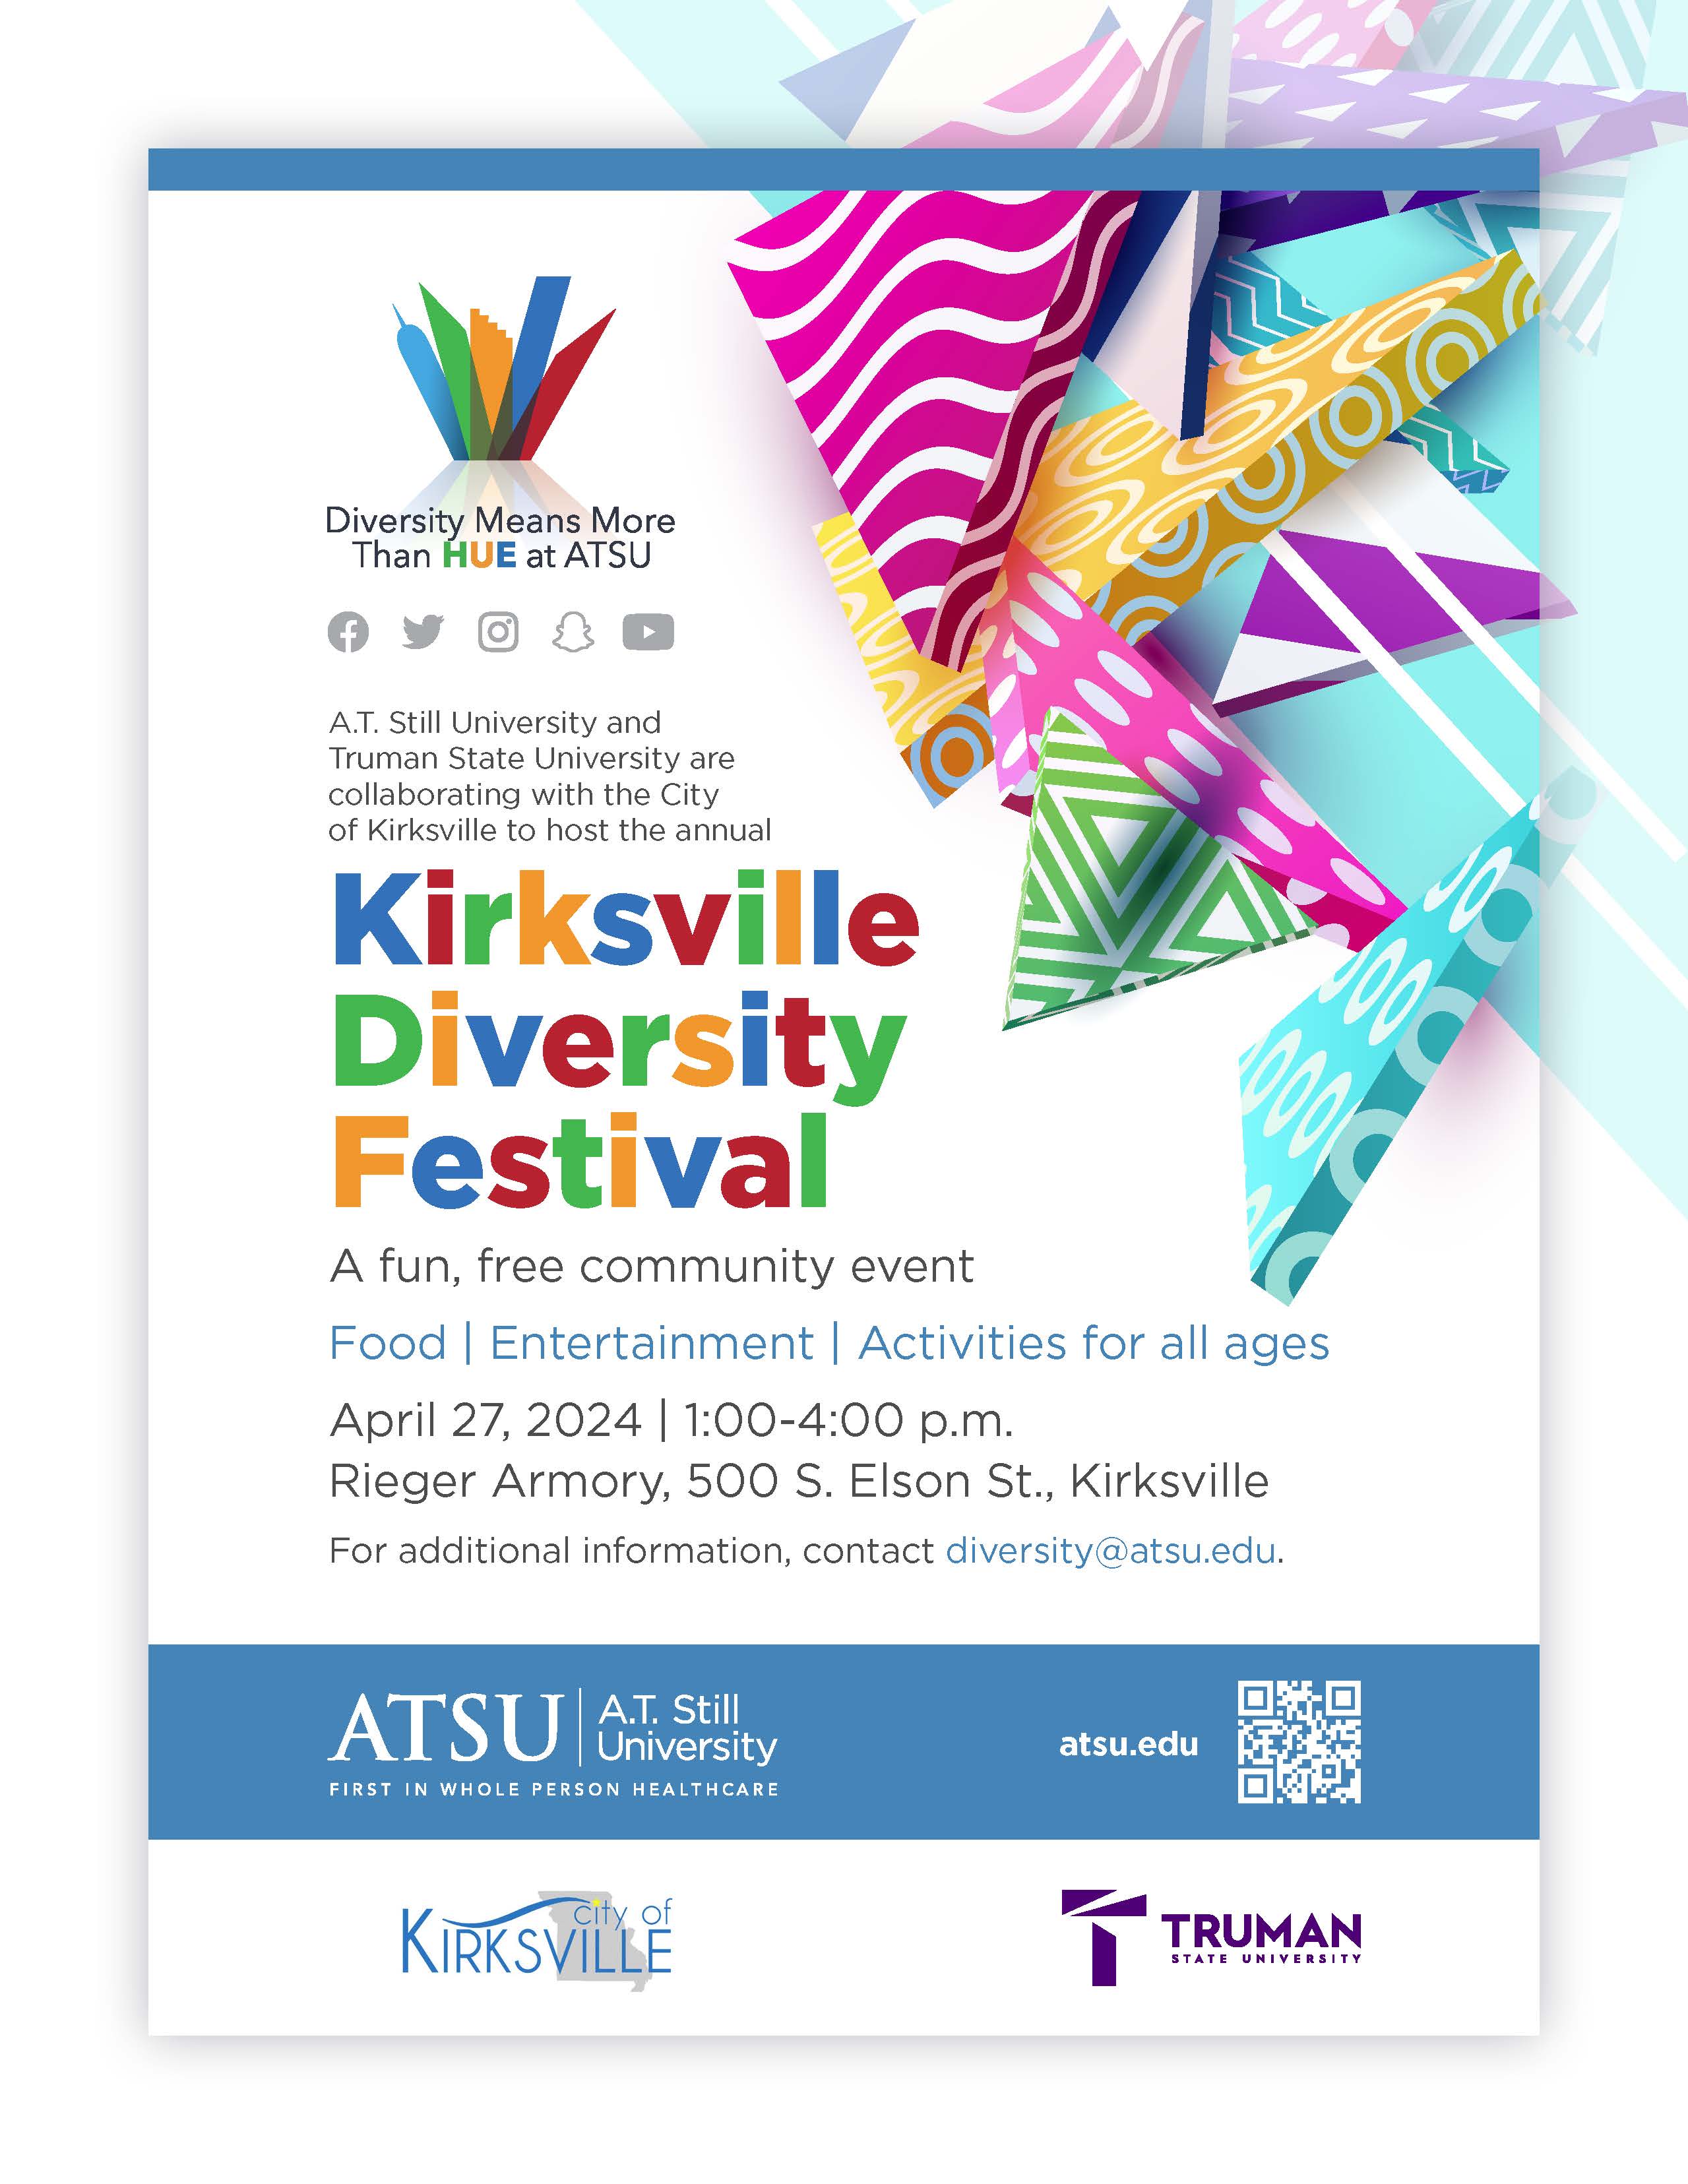 Check more about Diversity Festival